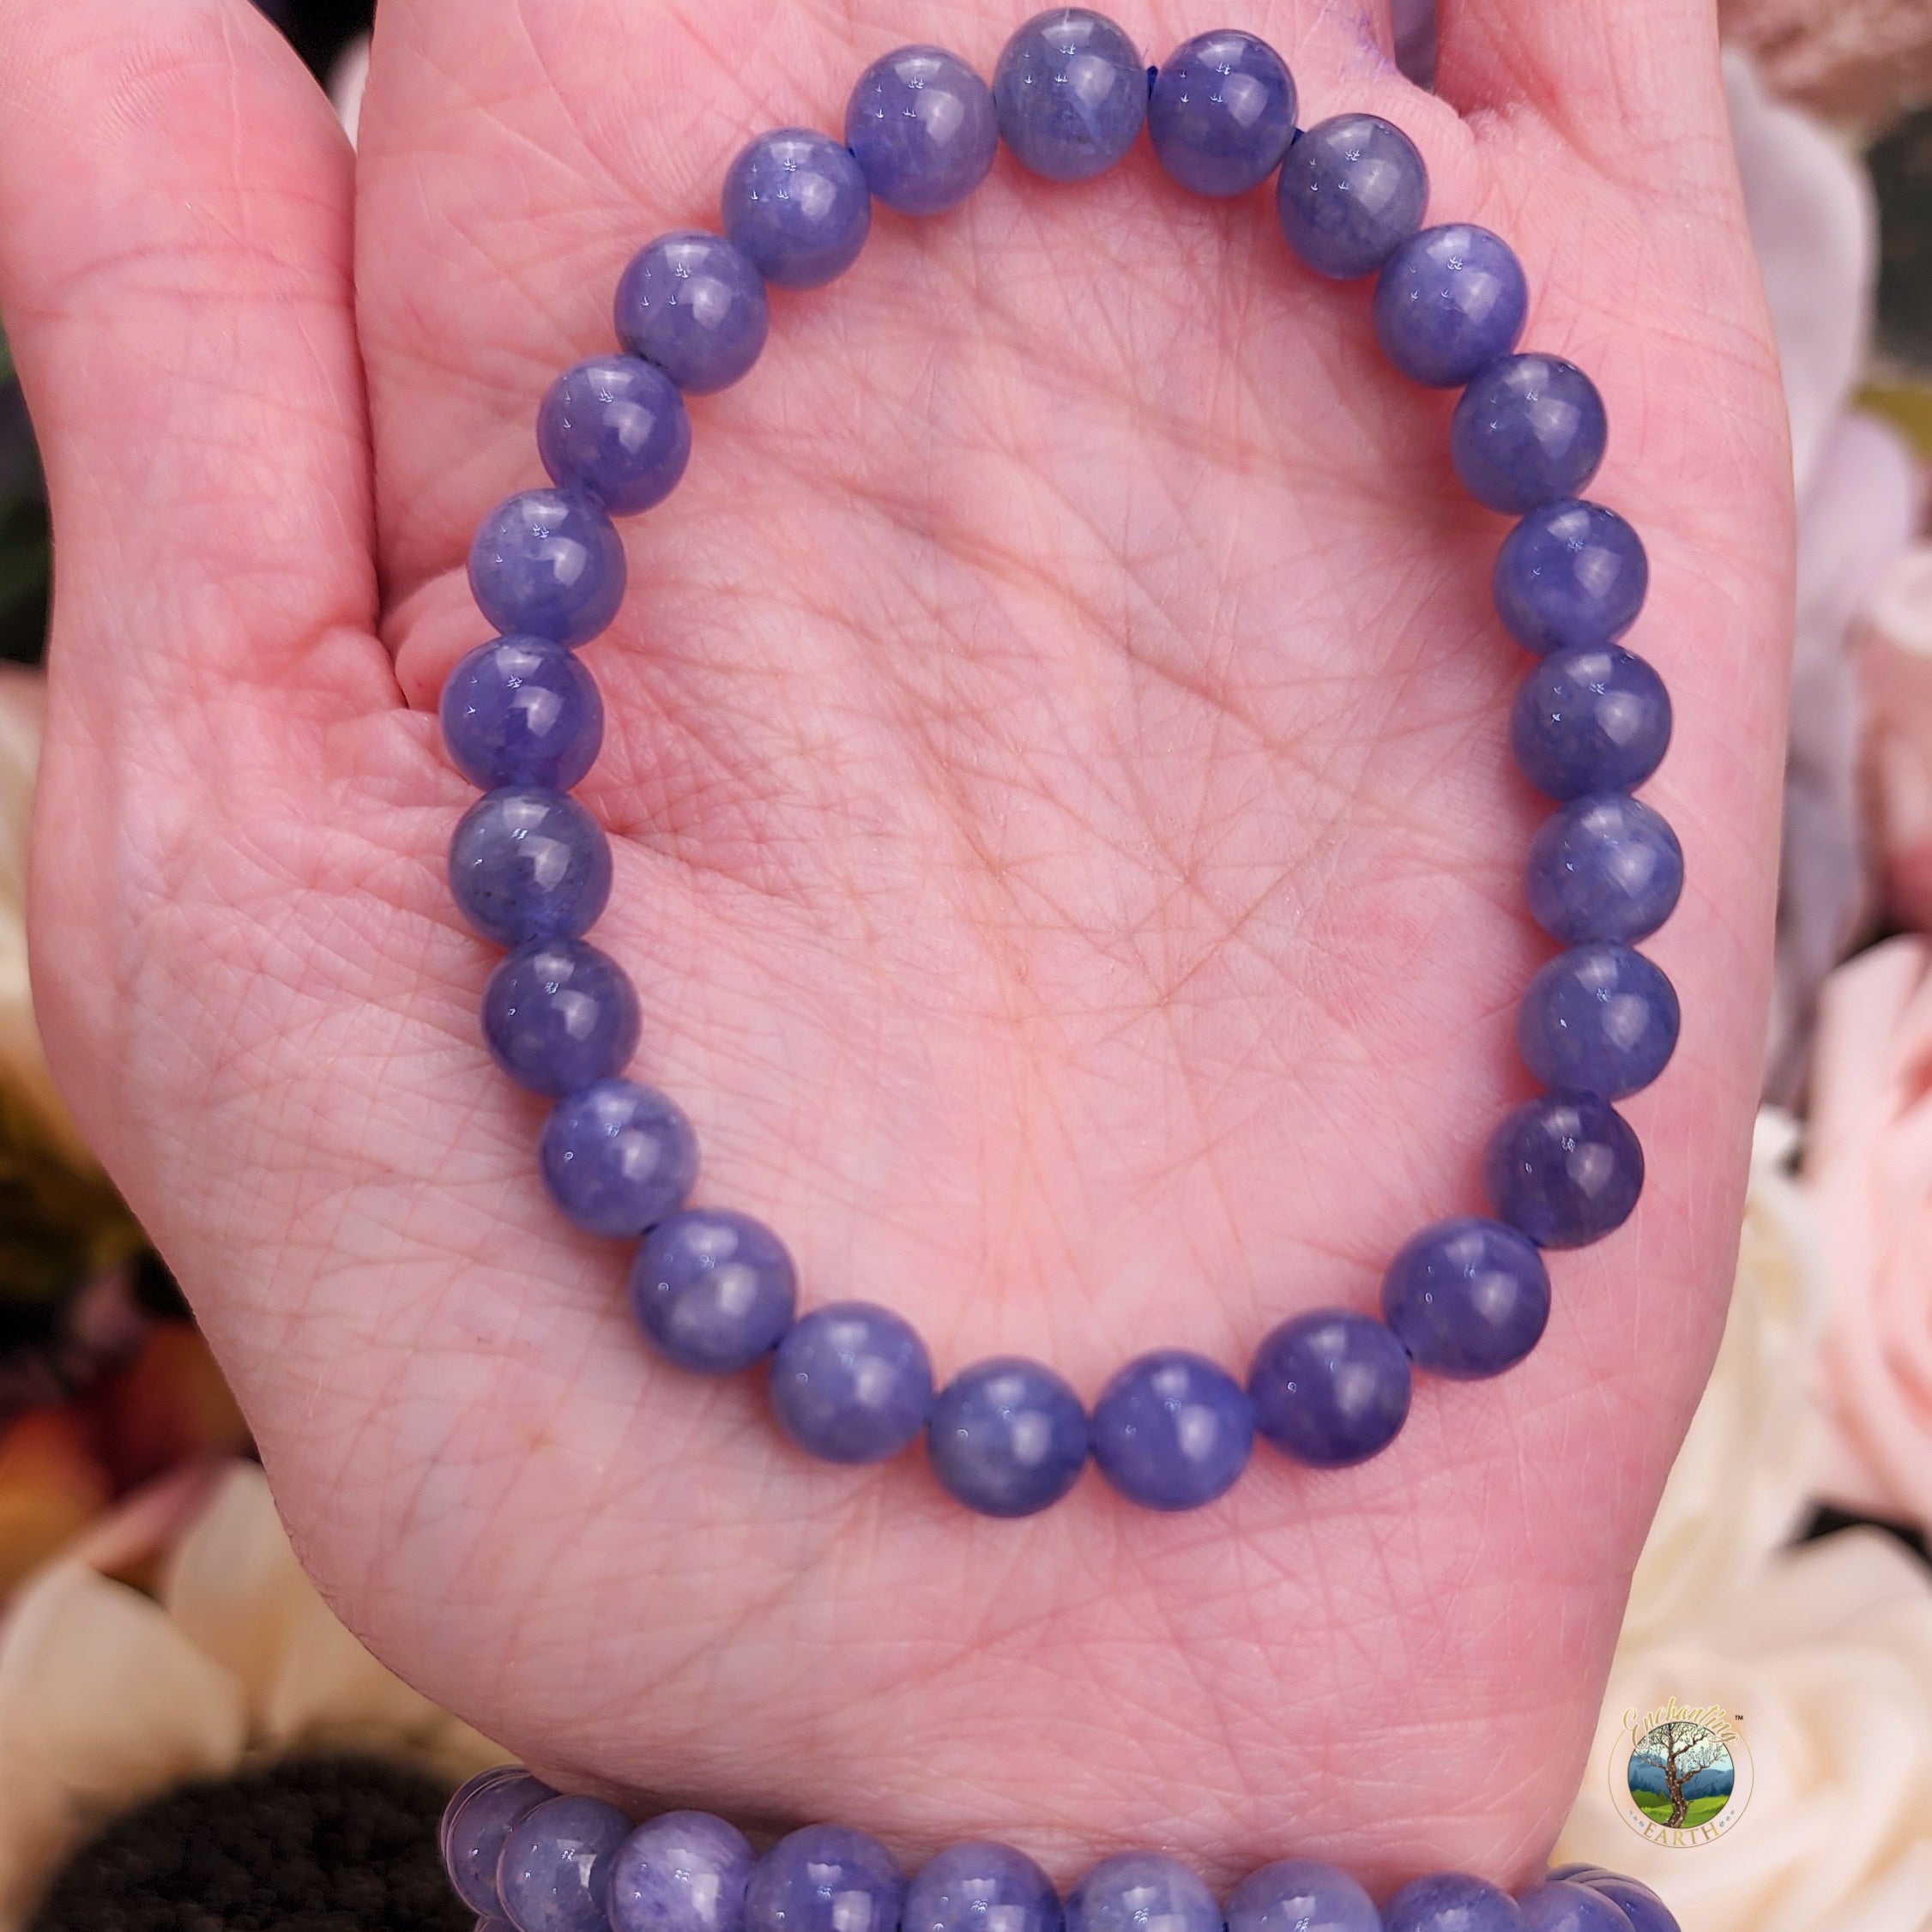 Tanzanite Bracelet (High Quality) for Compassion, Intuition & Raising your Vibration